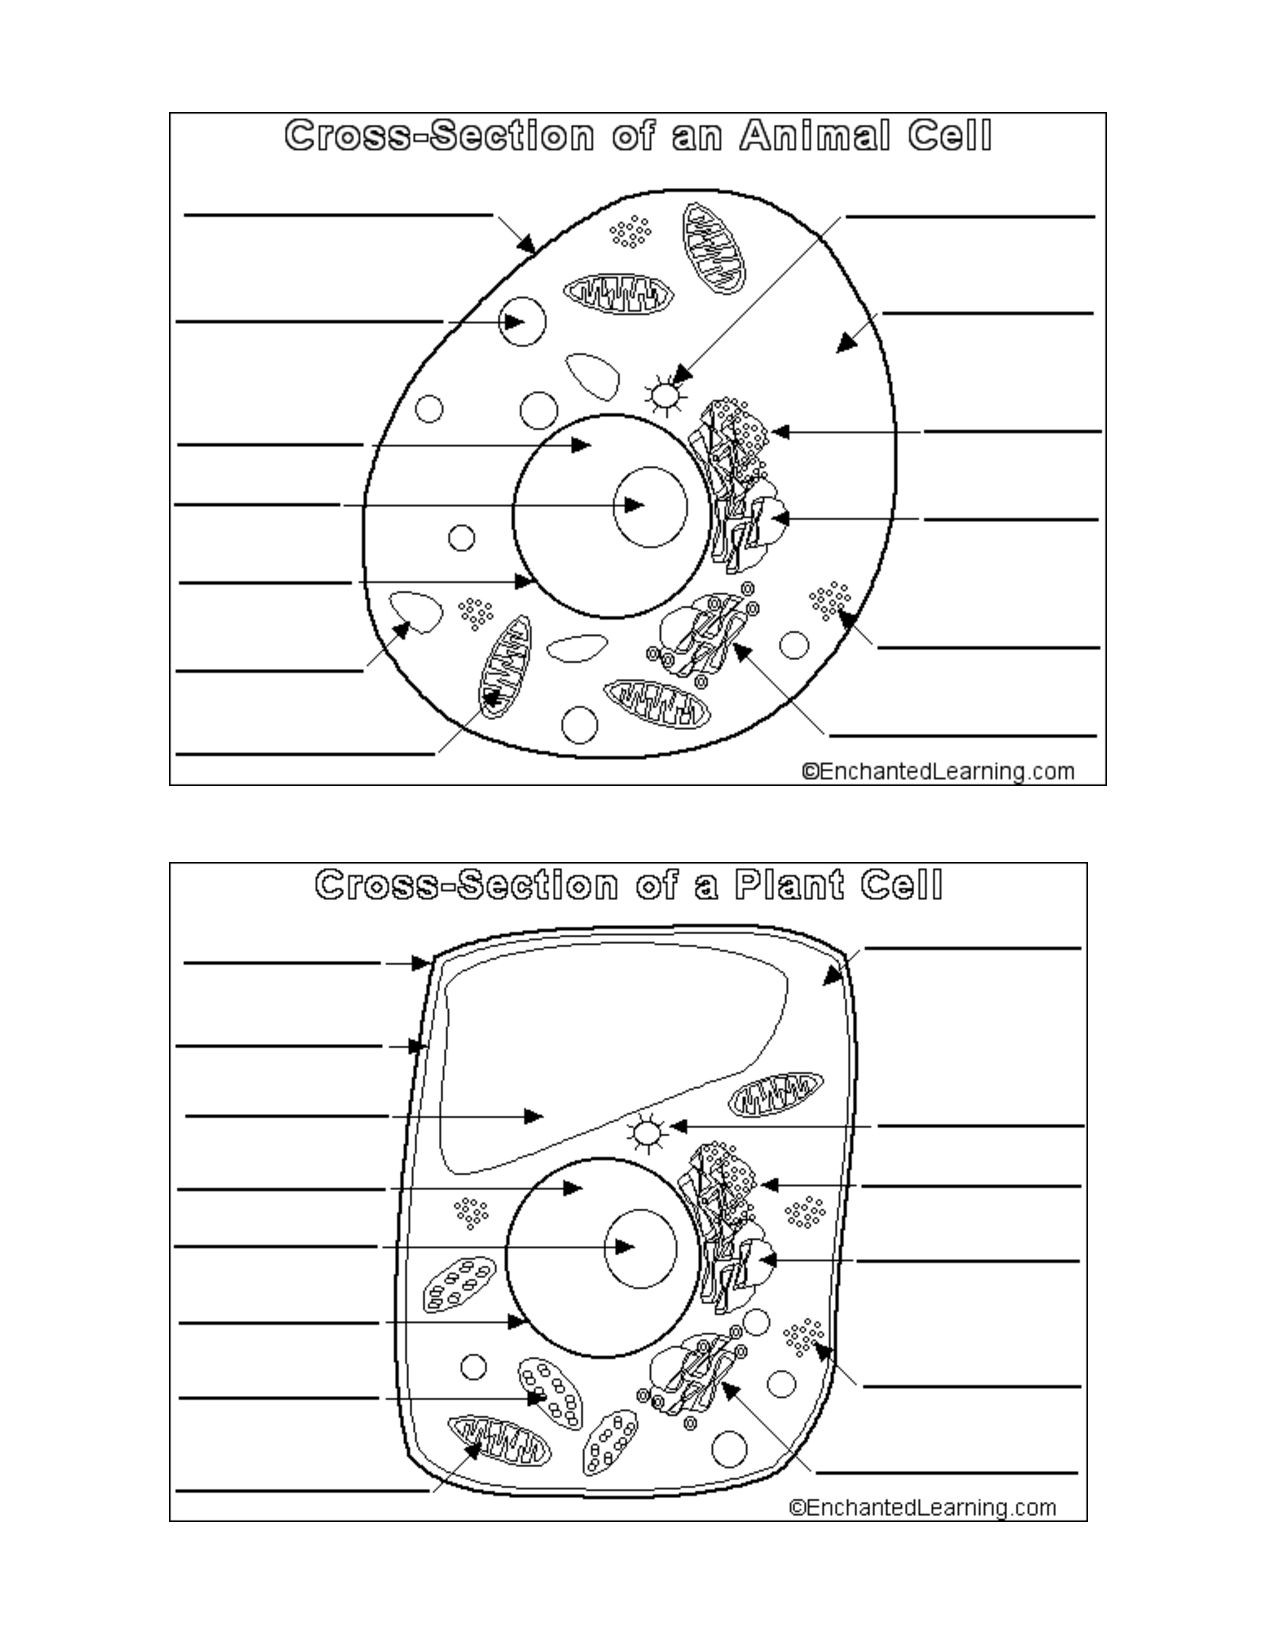 Printable Cell Worksheets à¸à¸±à¸à¸à¸´à¸à¹à¸à¸à¸­à¸£à¹à¸ Education